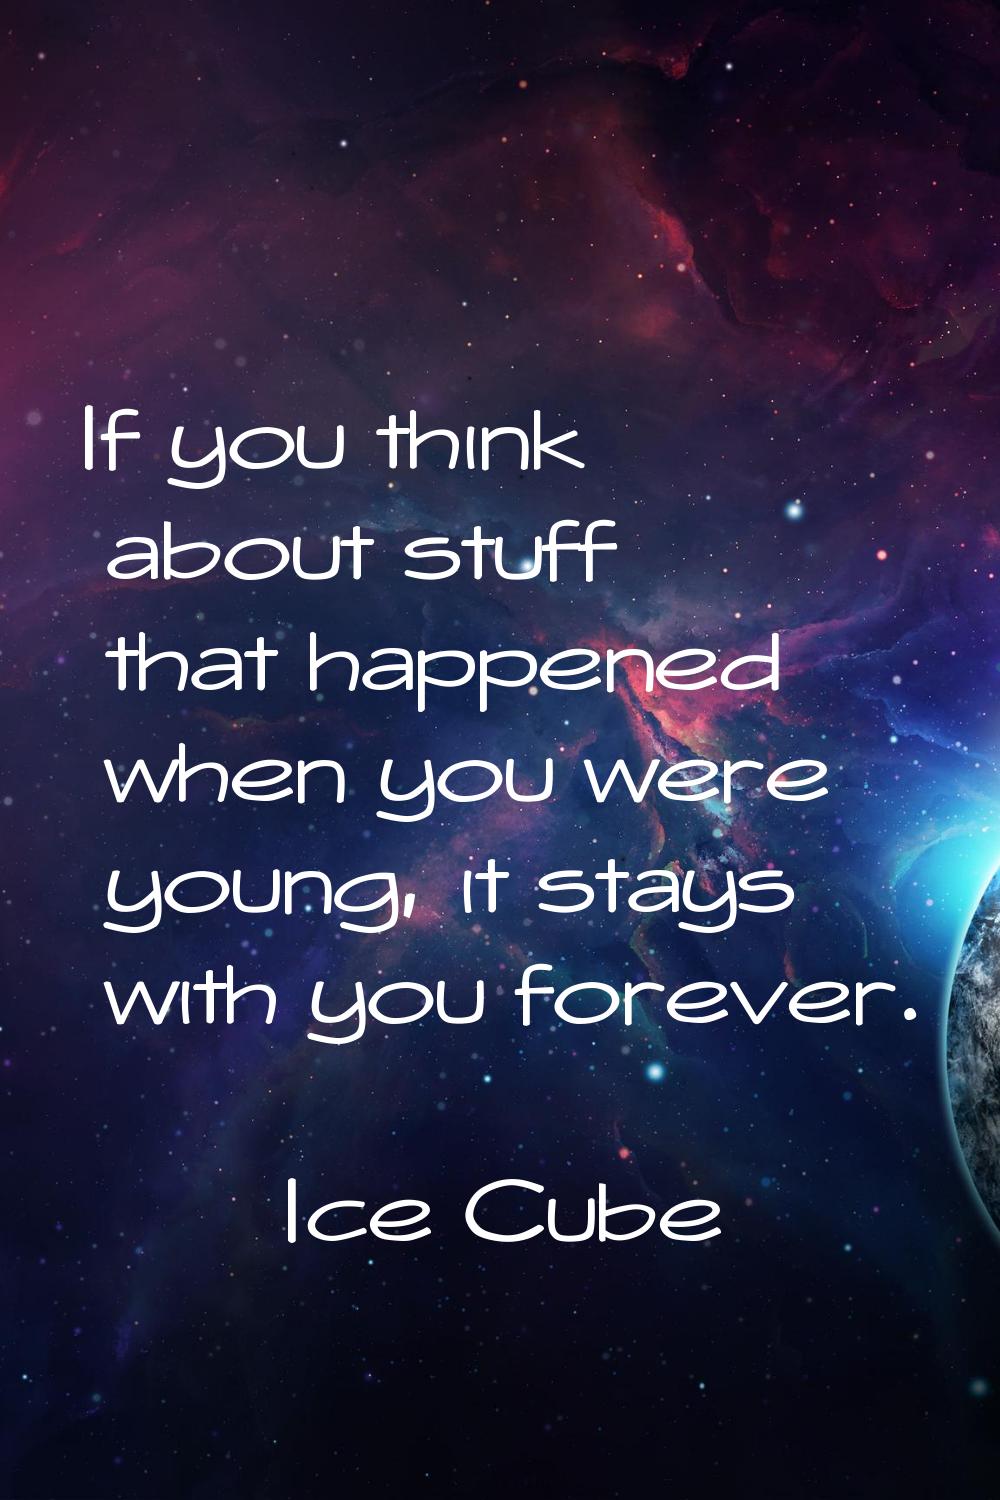 If you think about stuff that happened when you were young, it stays with you forever.